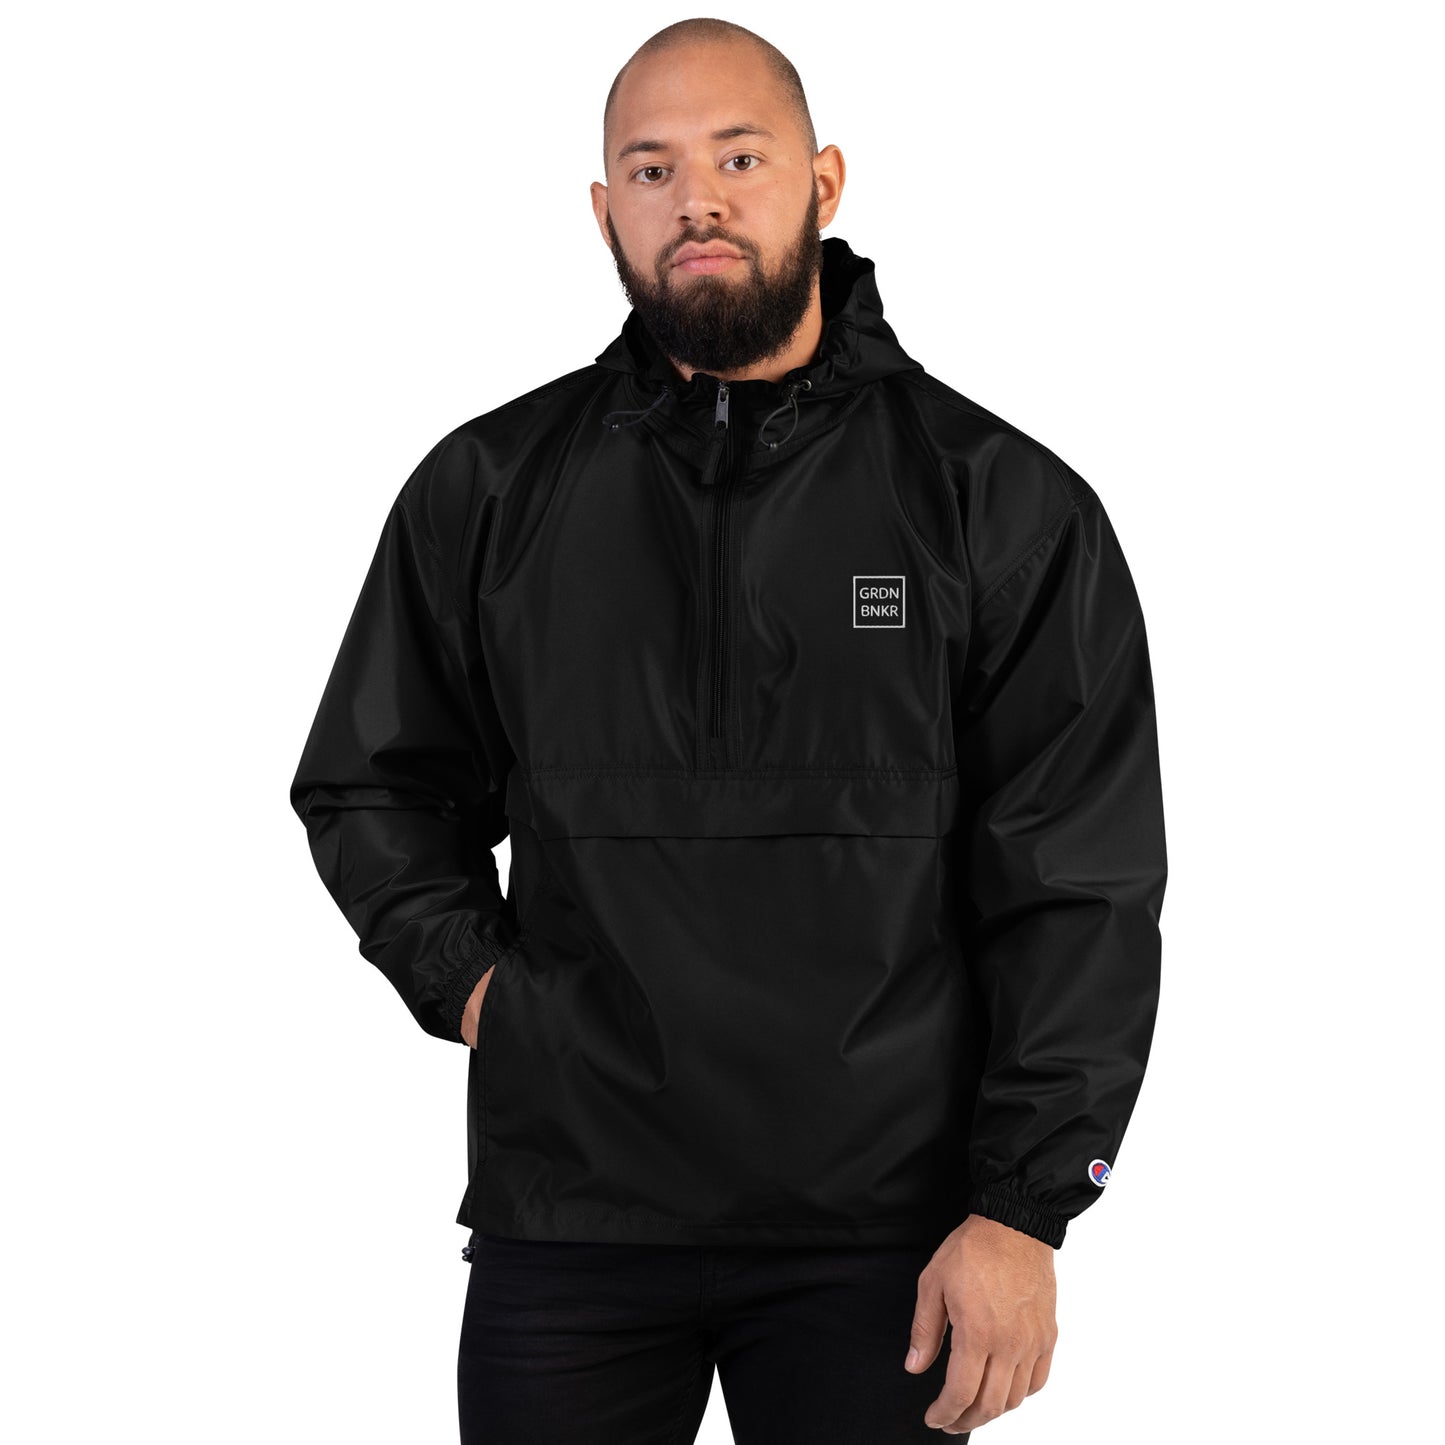 Embroidered Champion Packable Jacket with Badge Logo GRDN BNKR (White)